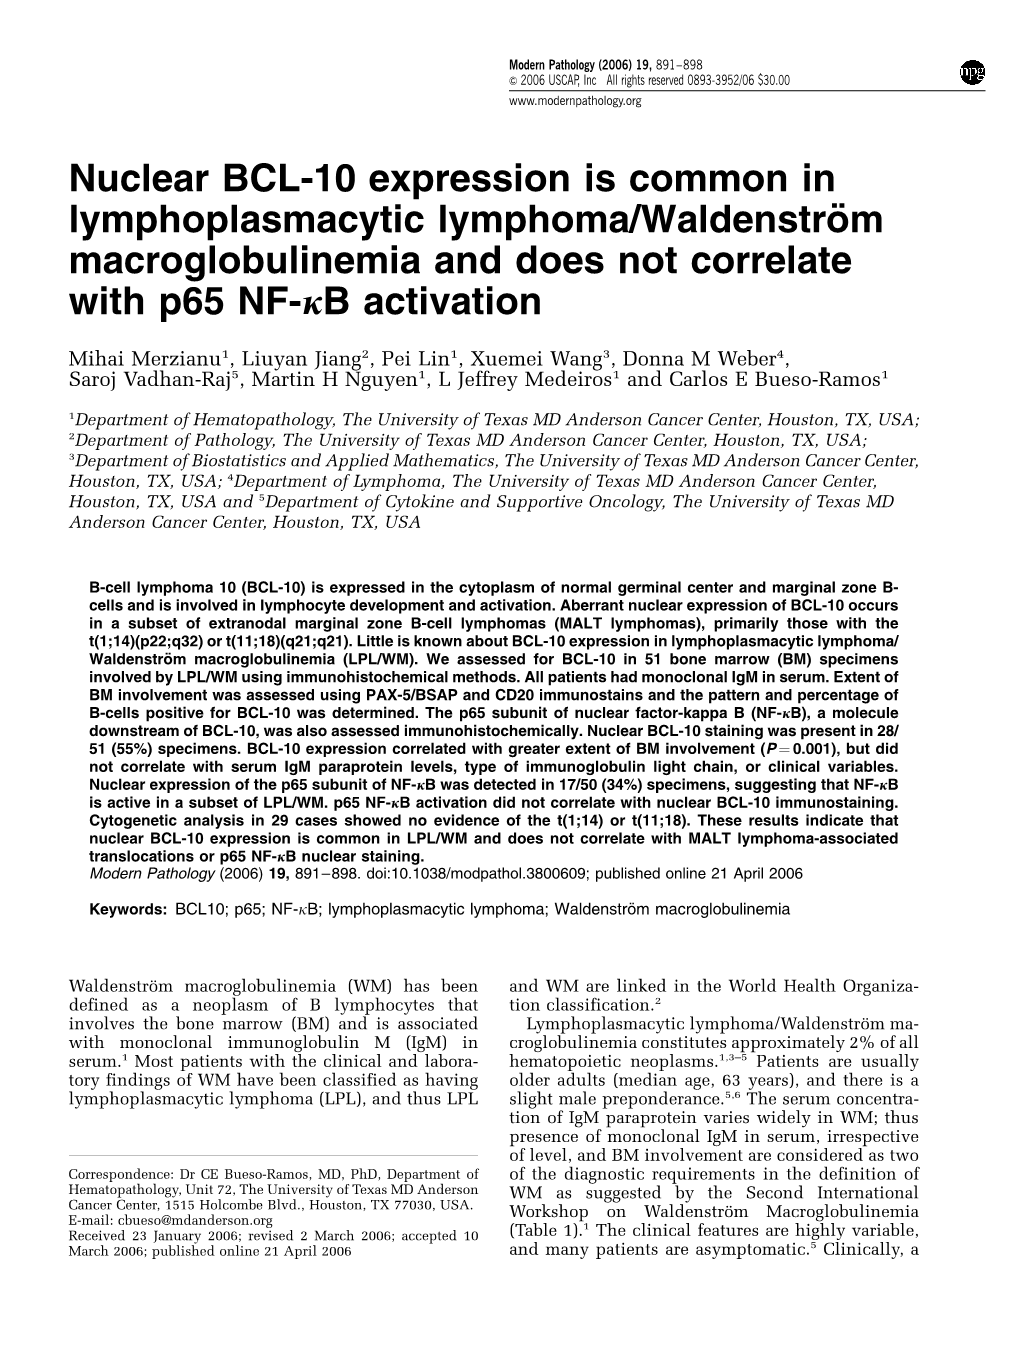 Nuclear BCL-10 Expression Is Common in Lymphoplasmacytic Lymphoma/Waldenstro¨ M Macroglobulinemia and Does Not Correlate with P65 NF-Jb Activation